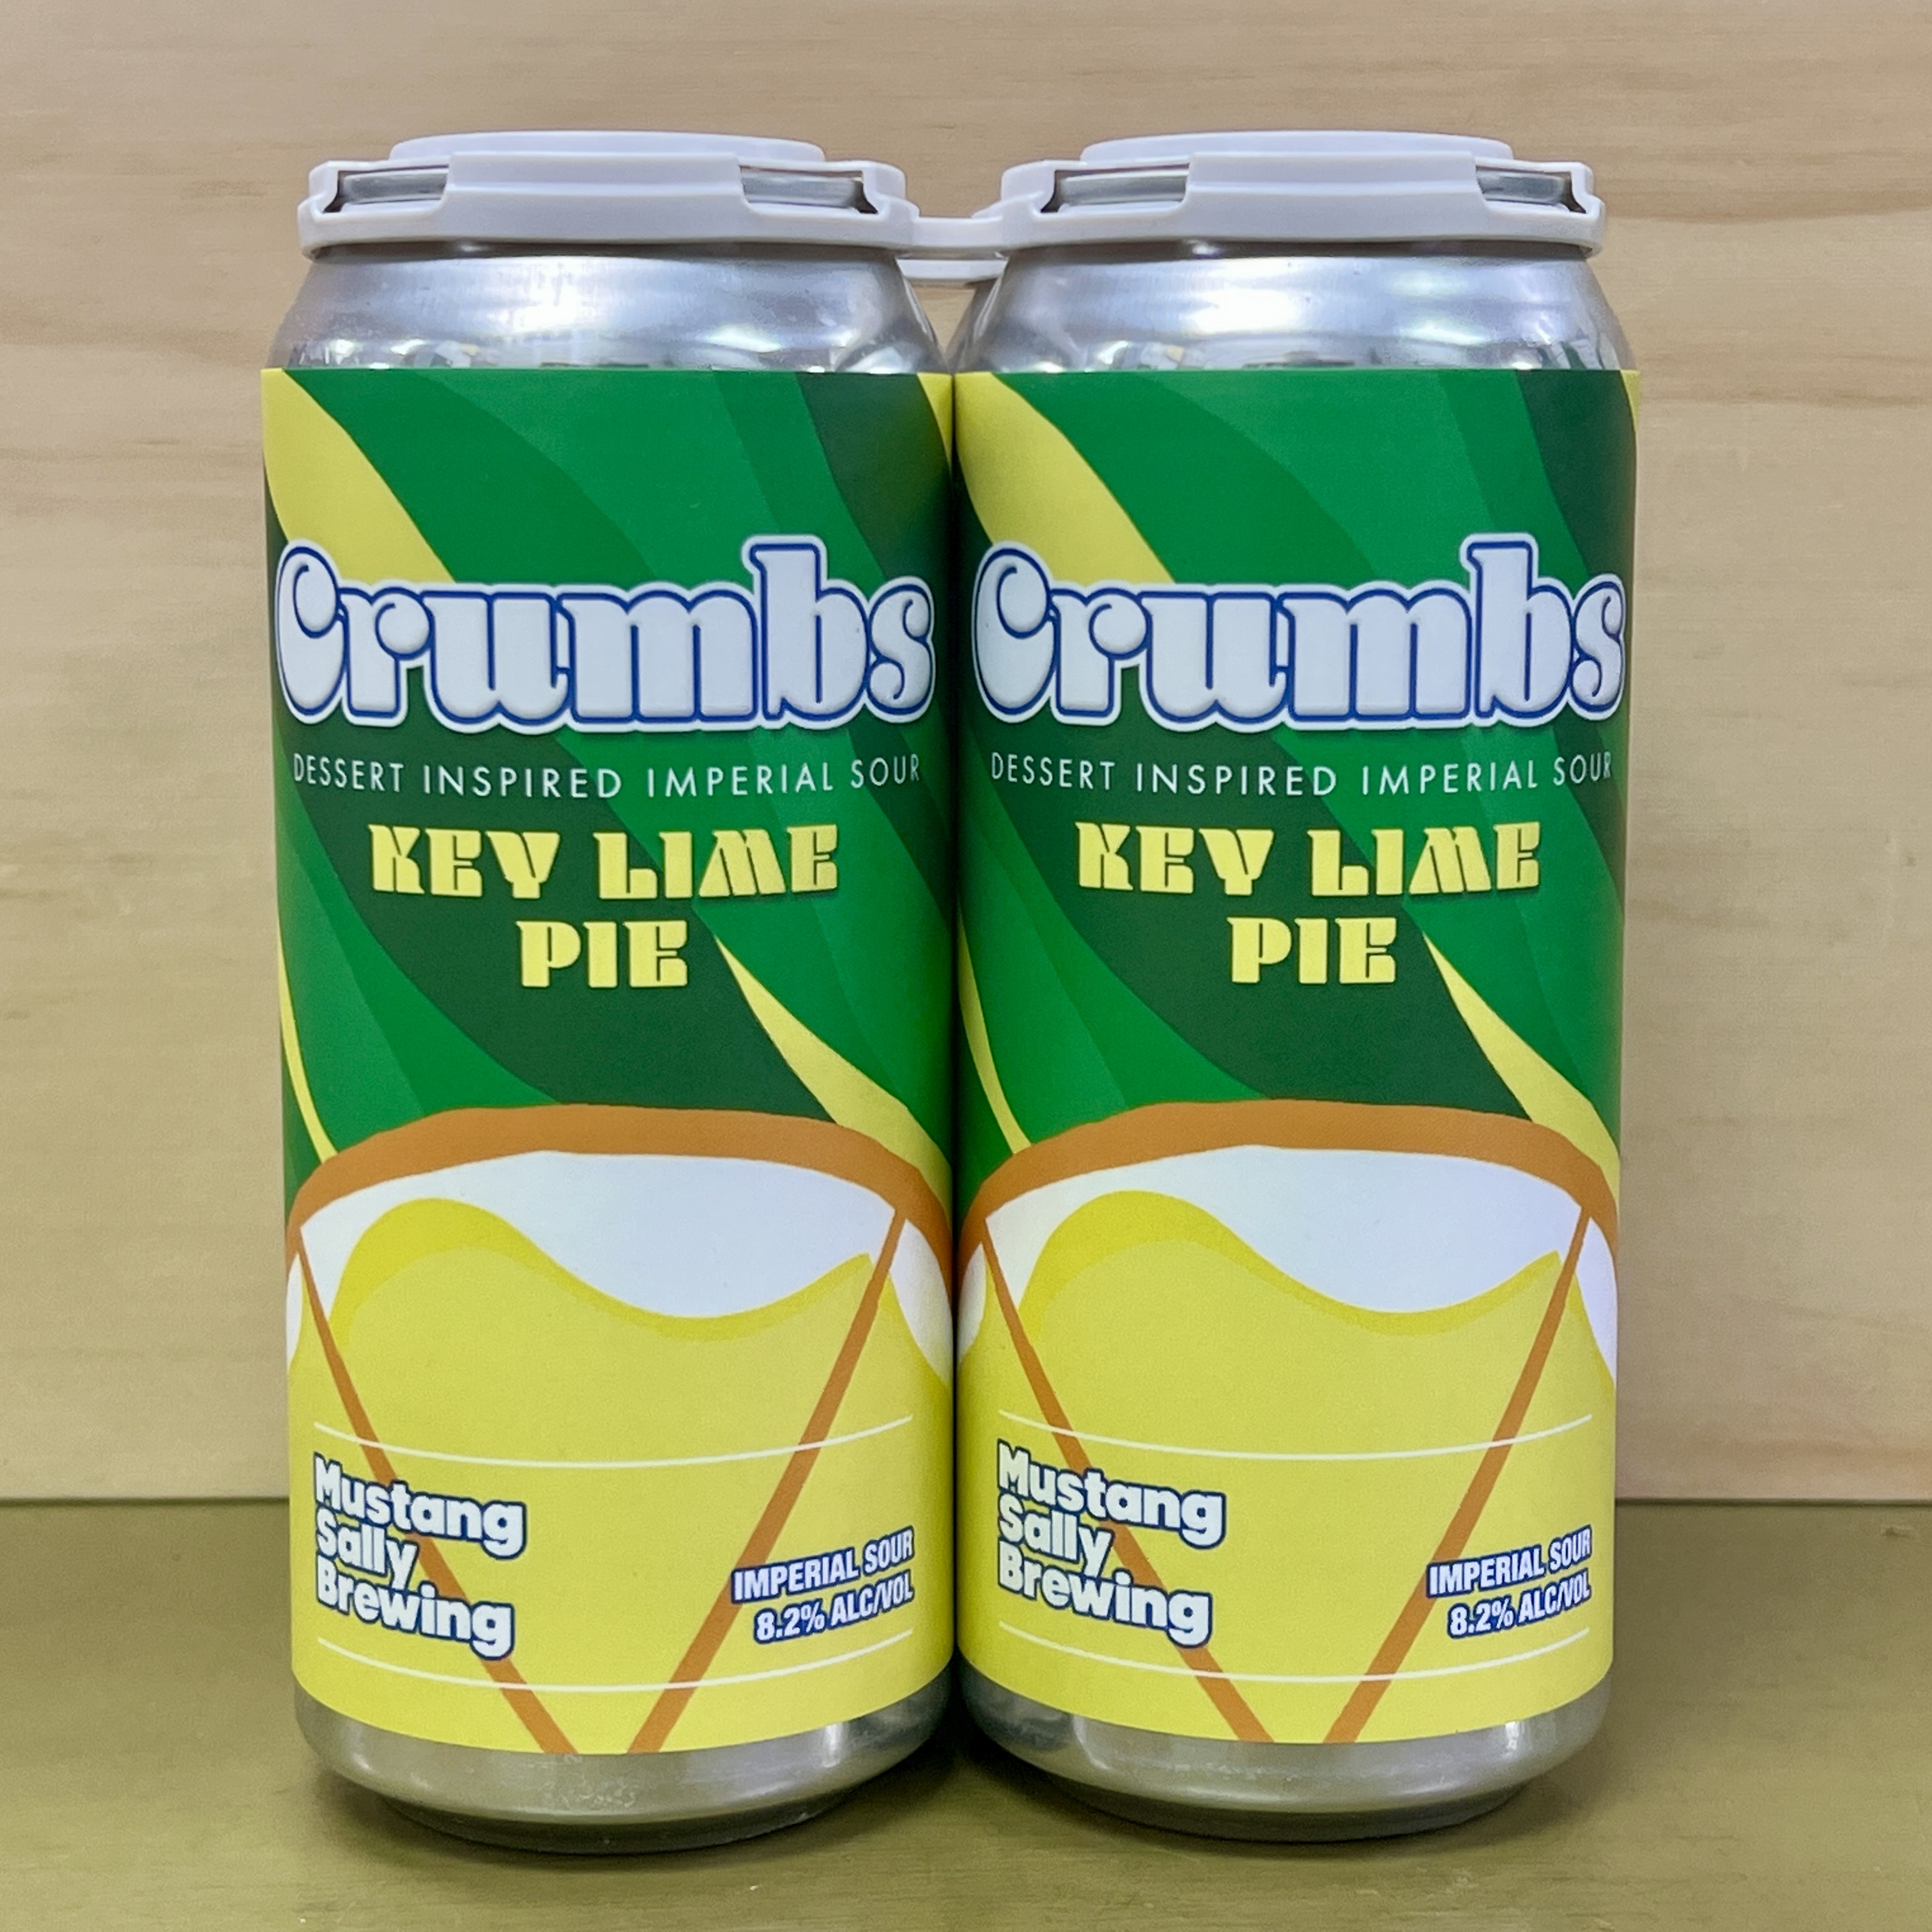 Mustang Sally 'Crumbs' Key Lime Pie Imperial Sour Ale 4 x 16oz cans - Click Image to Close